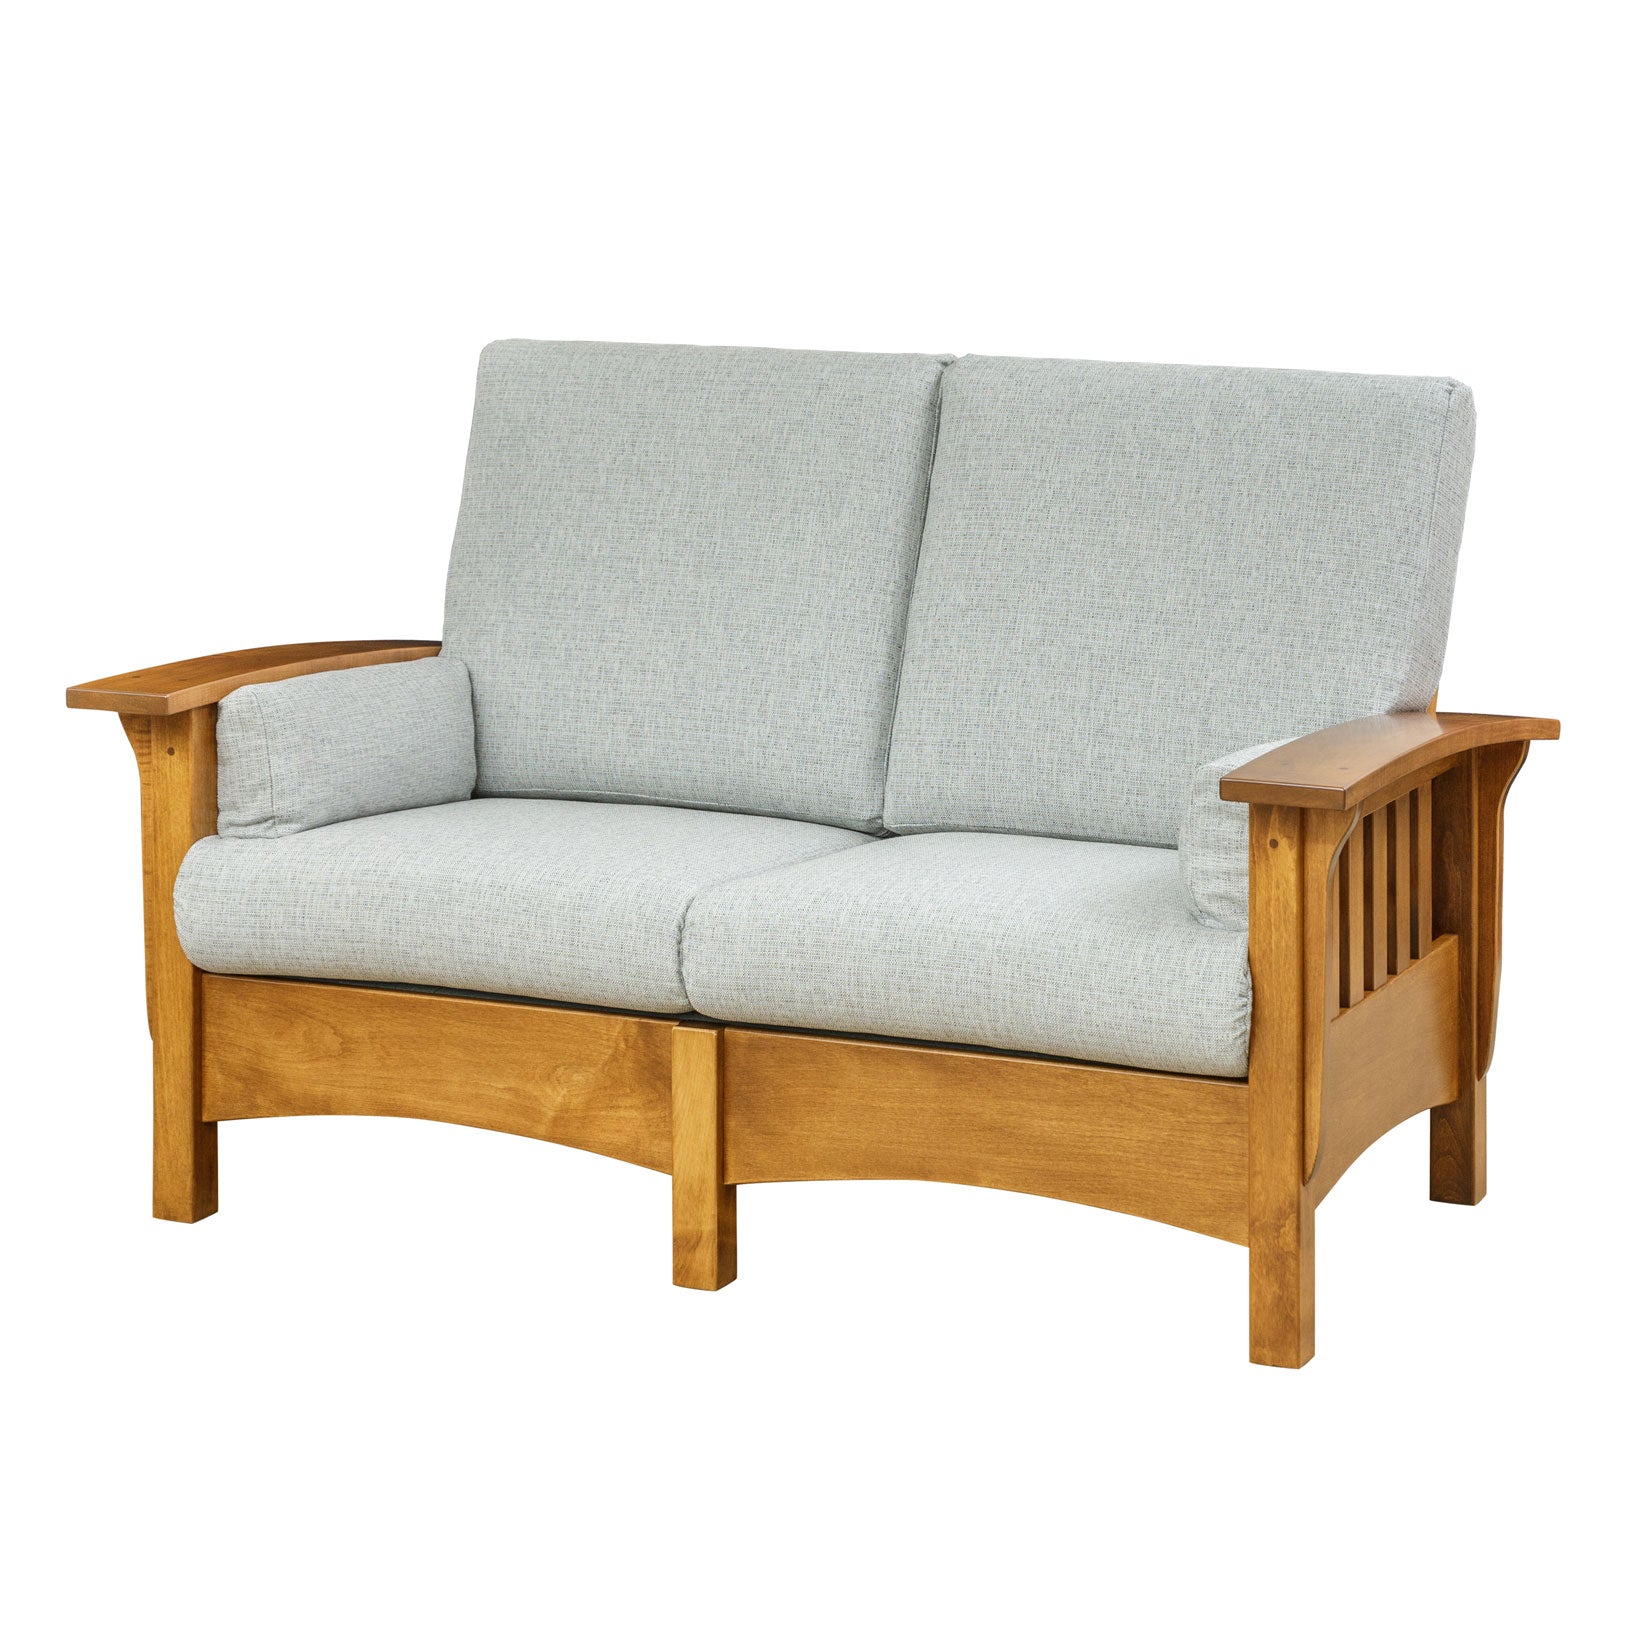 Classic Mission Morris Loveseat - snyders.furniture